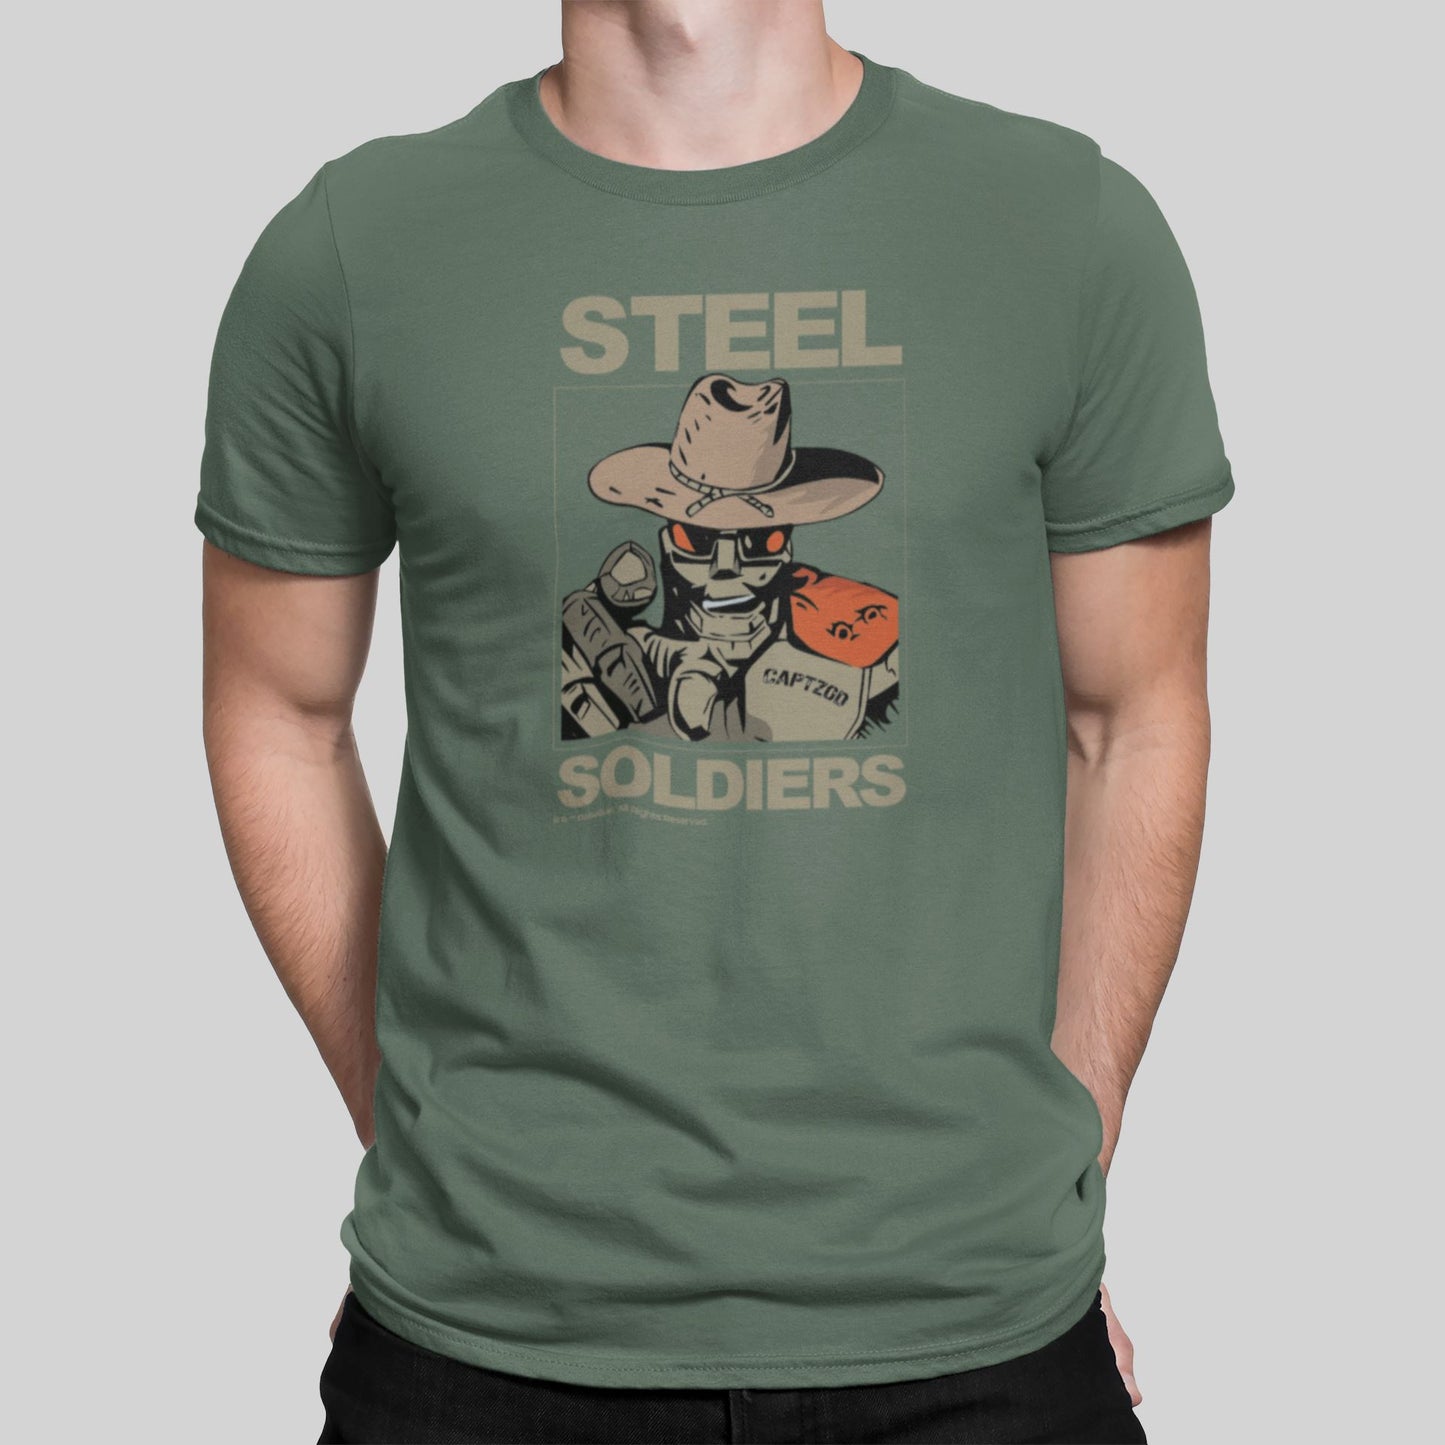 Z: Steel Soldiers Retro Gaming T-Shirt T-Shirt Seven Squared Small 34-36" Military Green 